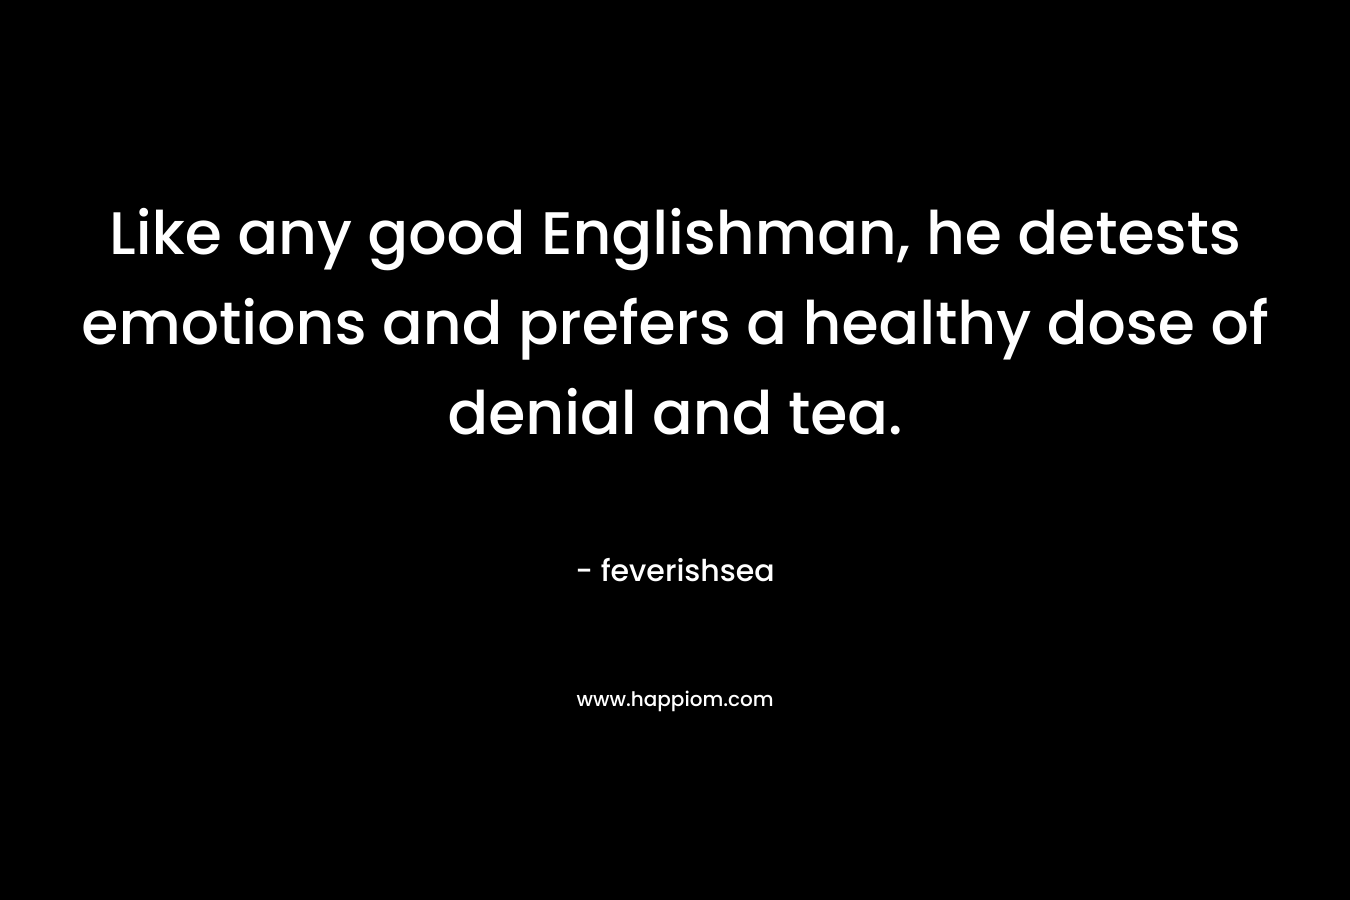 Like any good Englishman, he detests emotions and prefers a healthy dose of denial and tea.